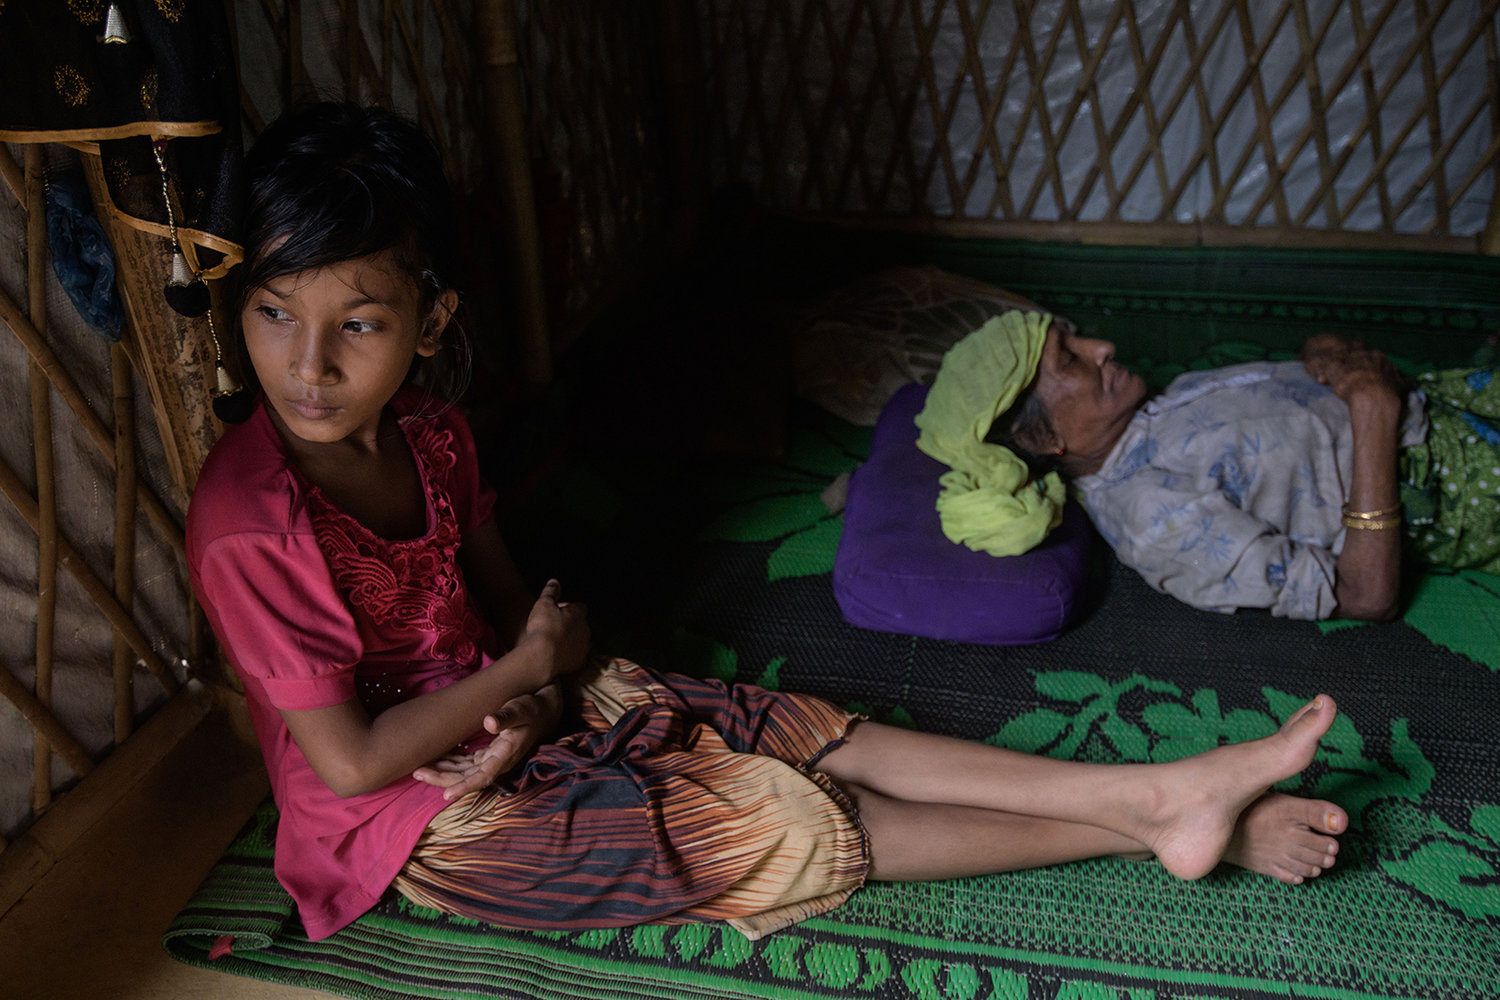 Rohingya refugee Saida Bibi (8, left) sits before her relative Bodu Zzaman (77, right), at the Kutupalong refugee camp near Cox's Bazar on Aug. 11, 2018. - According to her daughter, ZZaman, who is unable to talk, continues to suffer from a broken hip sustained when she fell fleeing bullets fired by Myanmar soldiers who attacked her village in September 2017. (Ed Jones/AFP via Getty Images/TNS)